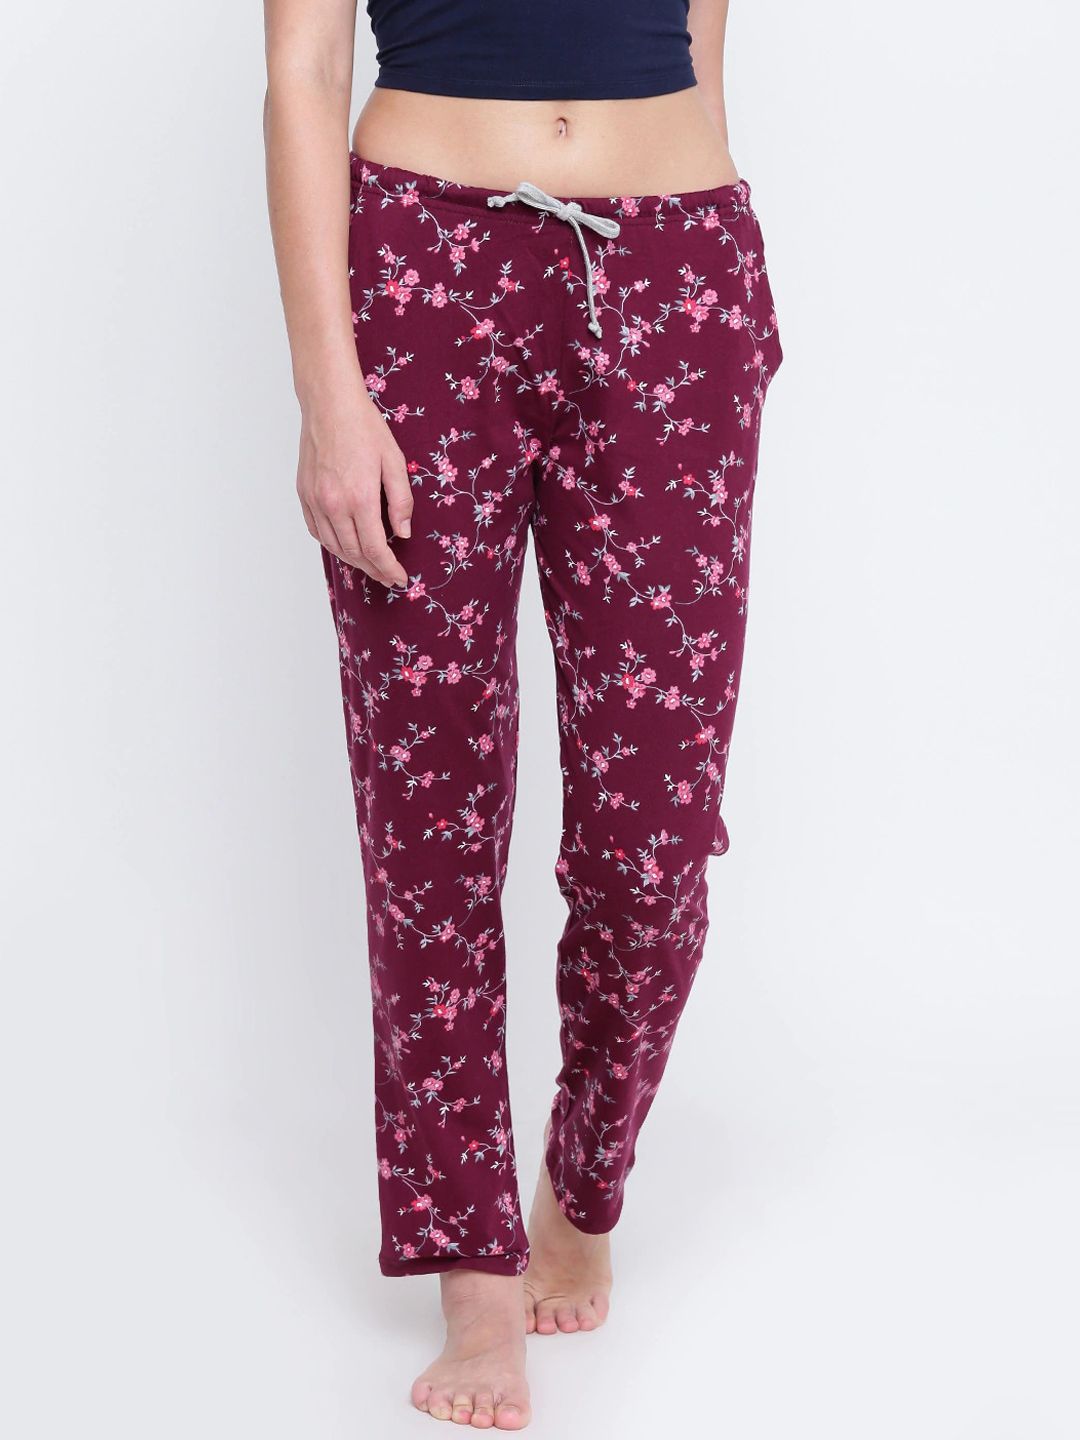 Kanvin Women Maroon Printed Cotton Lounge Pants Price in India